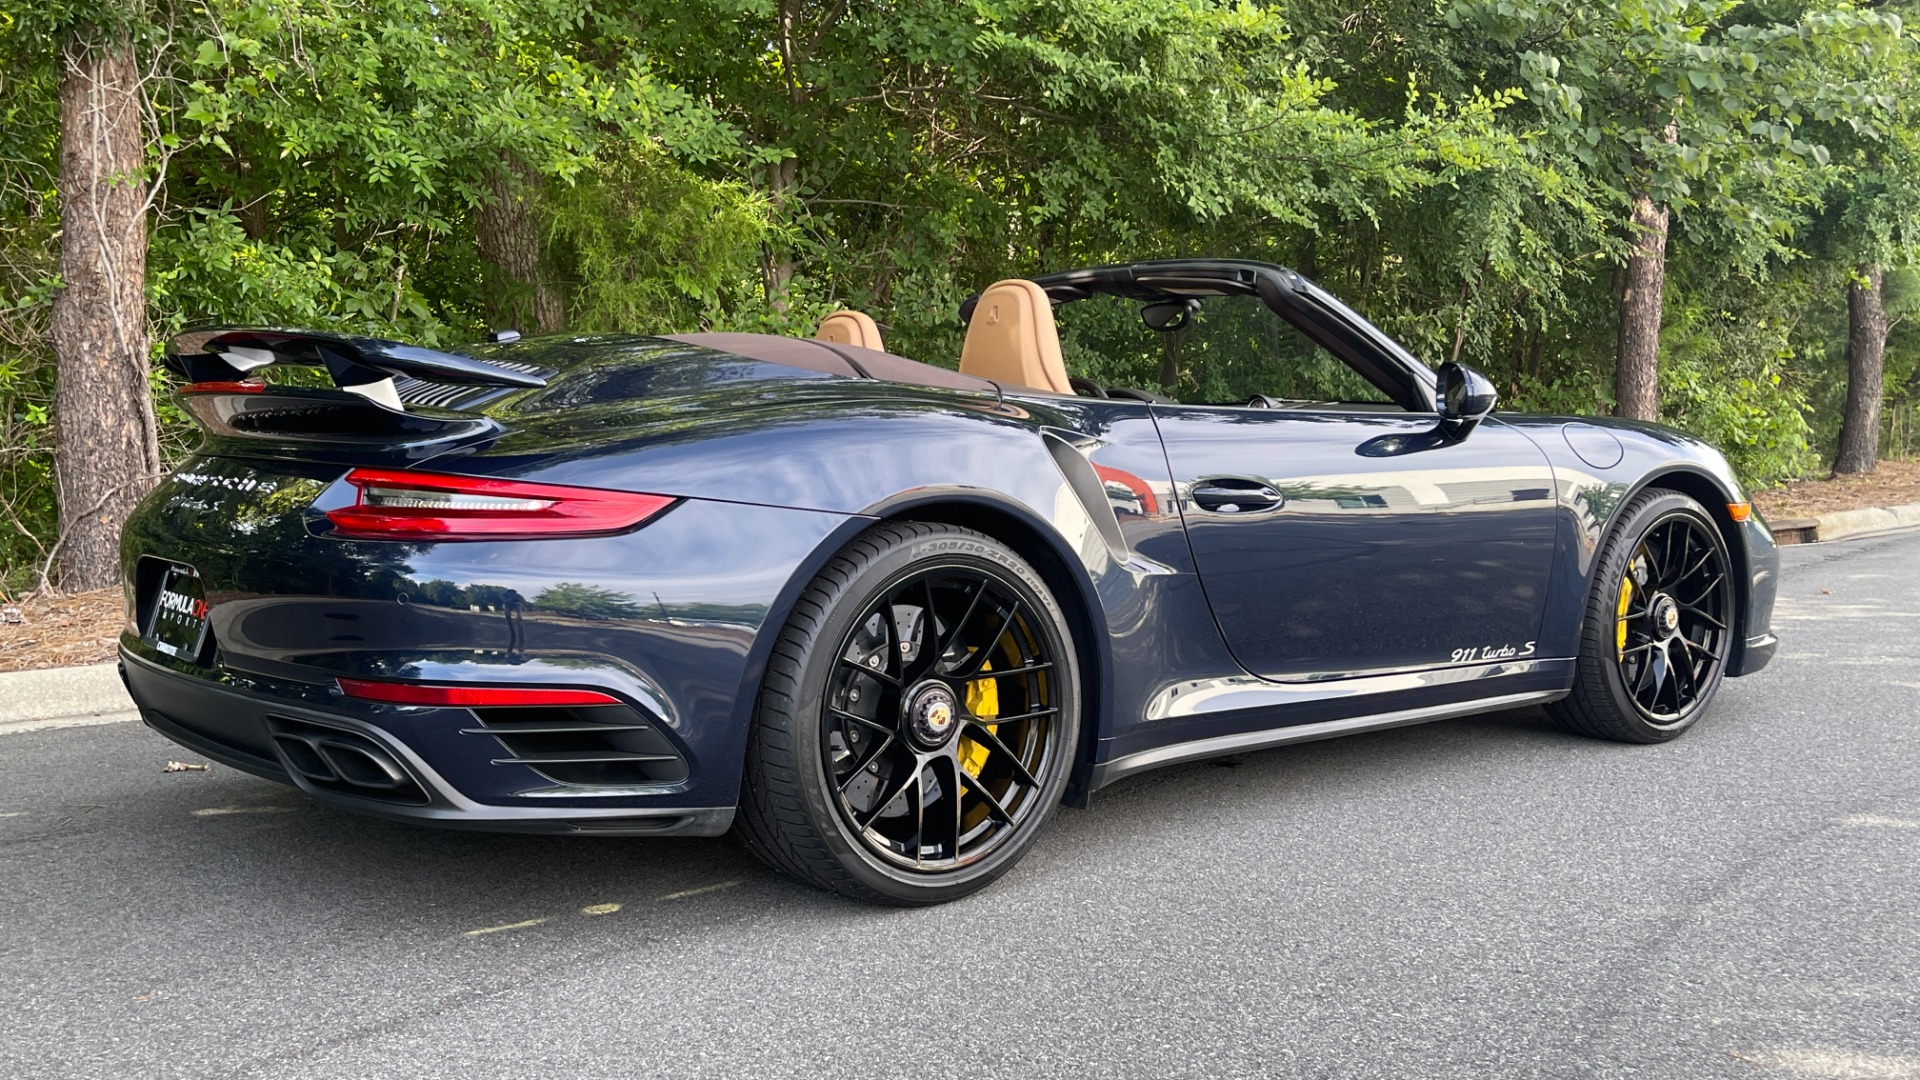 Used 2017 Porsche 911 Turbo S / CABRIOLET / FRONT LIFT / PDK / 20IN WHEELS for sale Sold at Formula Imports in Charlotte NC 28227 31